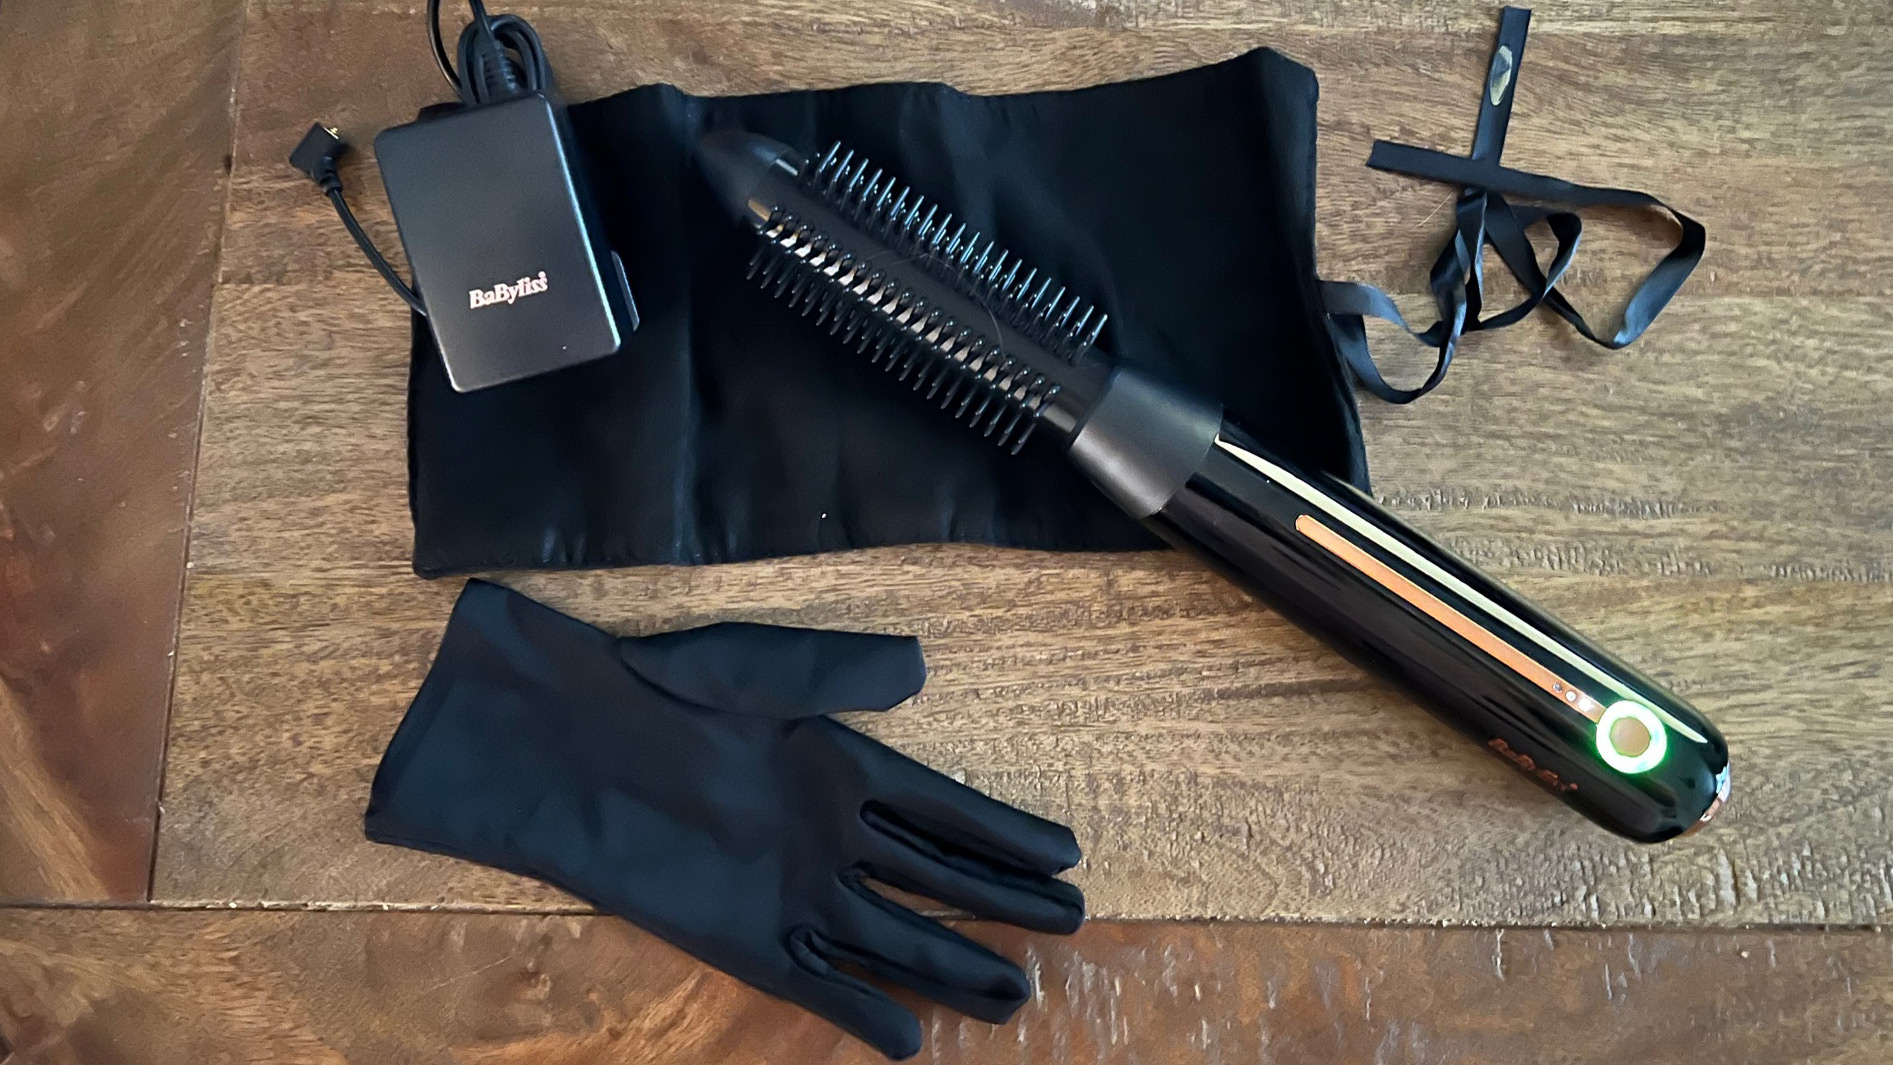 The BaByliss 900 cordless hot brush with all its accessories